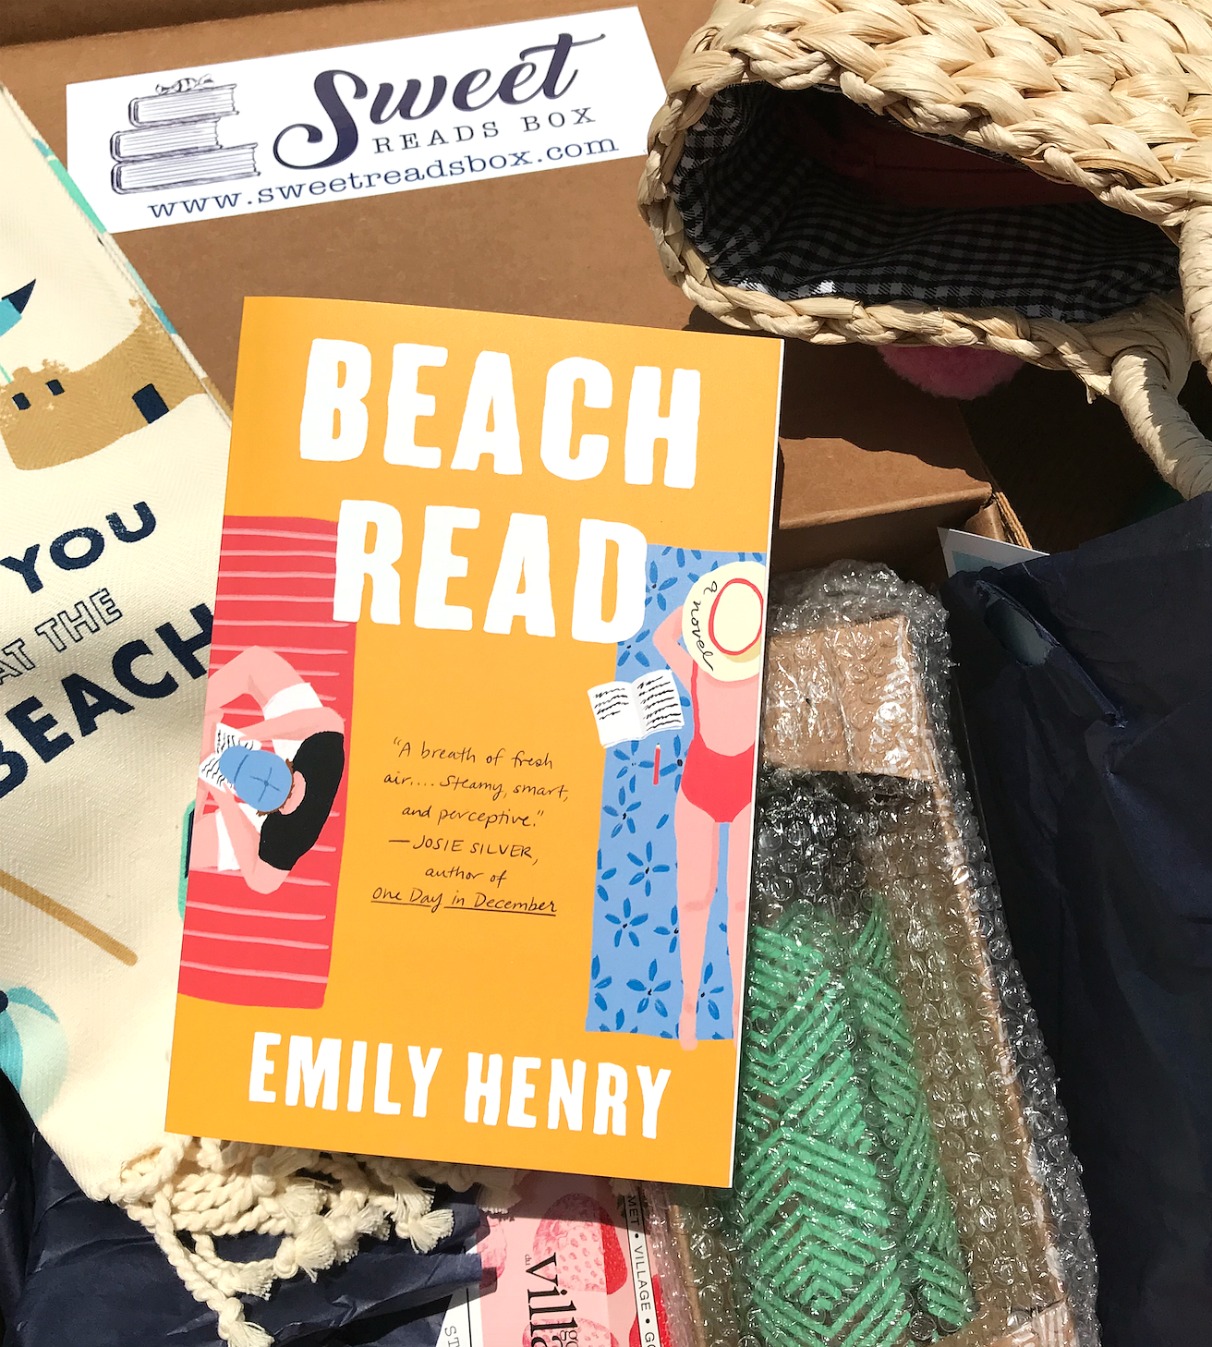 Sweet Reads Box Beach Read Box June 2020 Beach Read by Emily Henry in the box